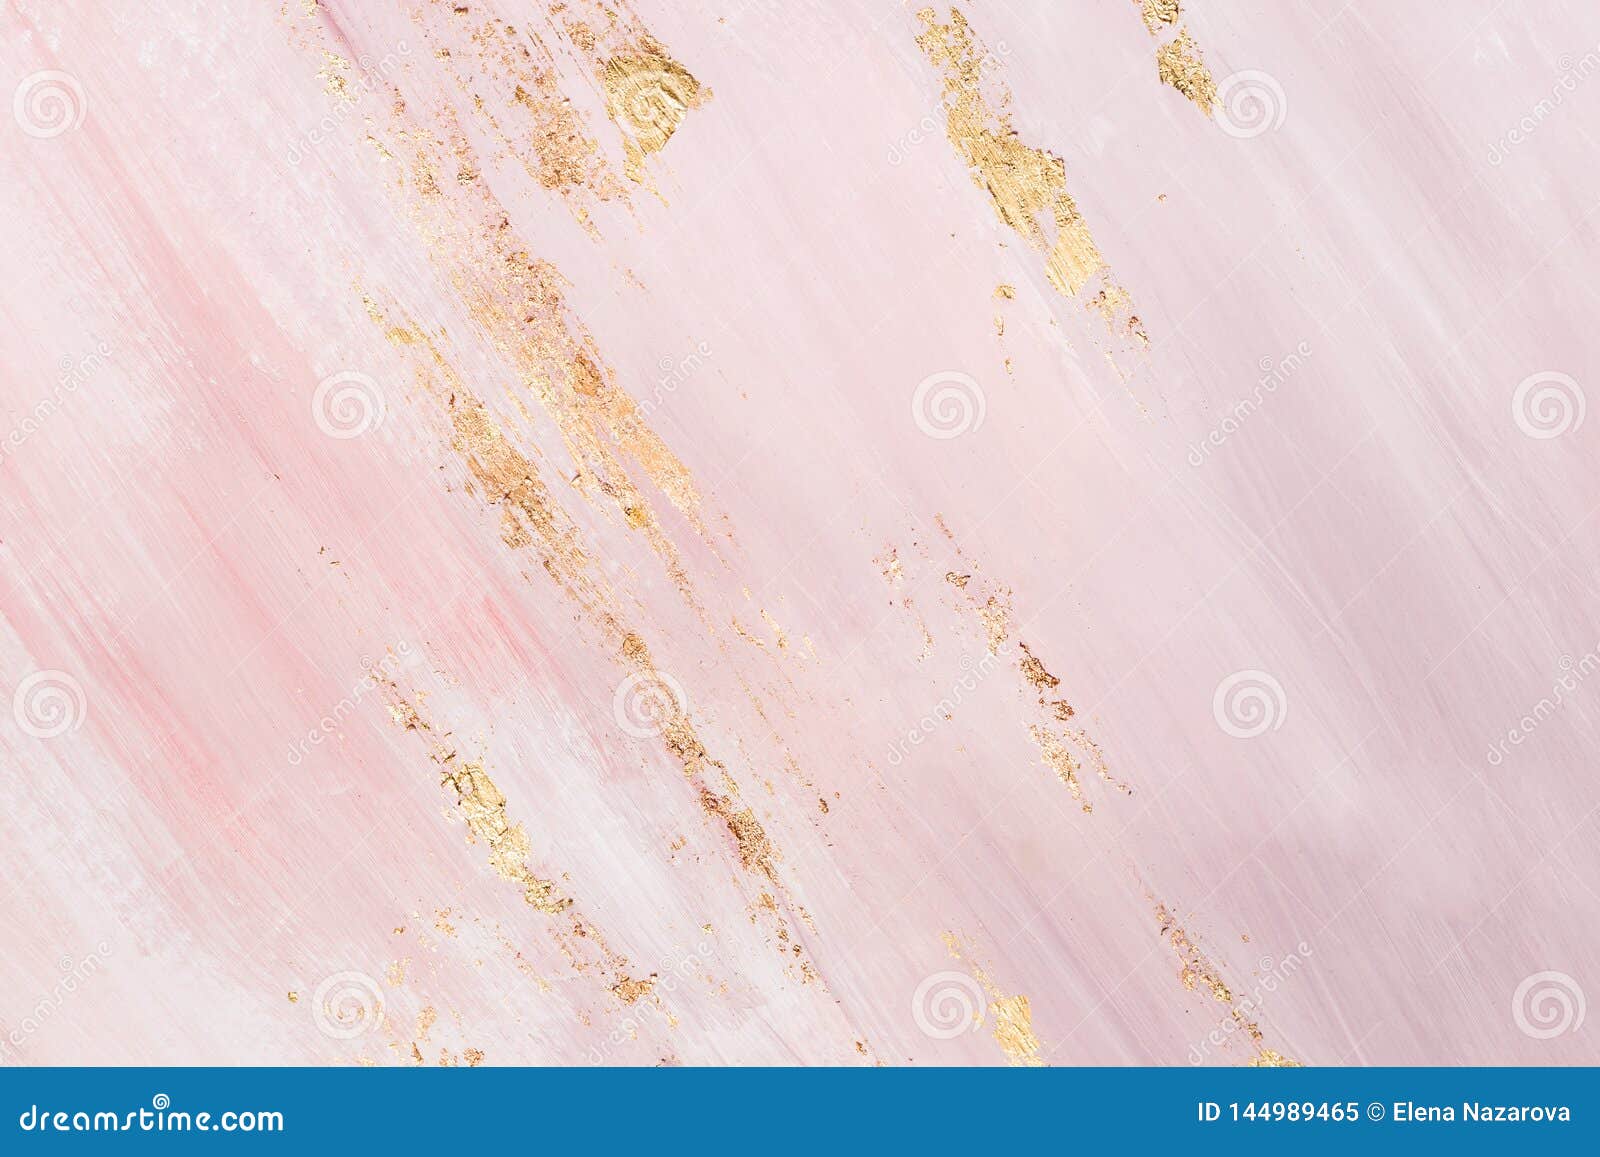 delicate pink marble background with gold brushstrokes. place for your 